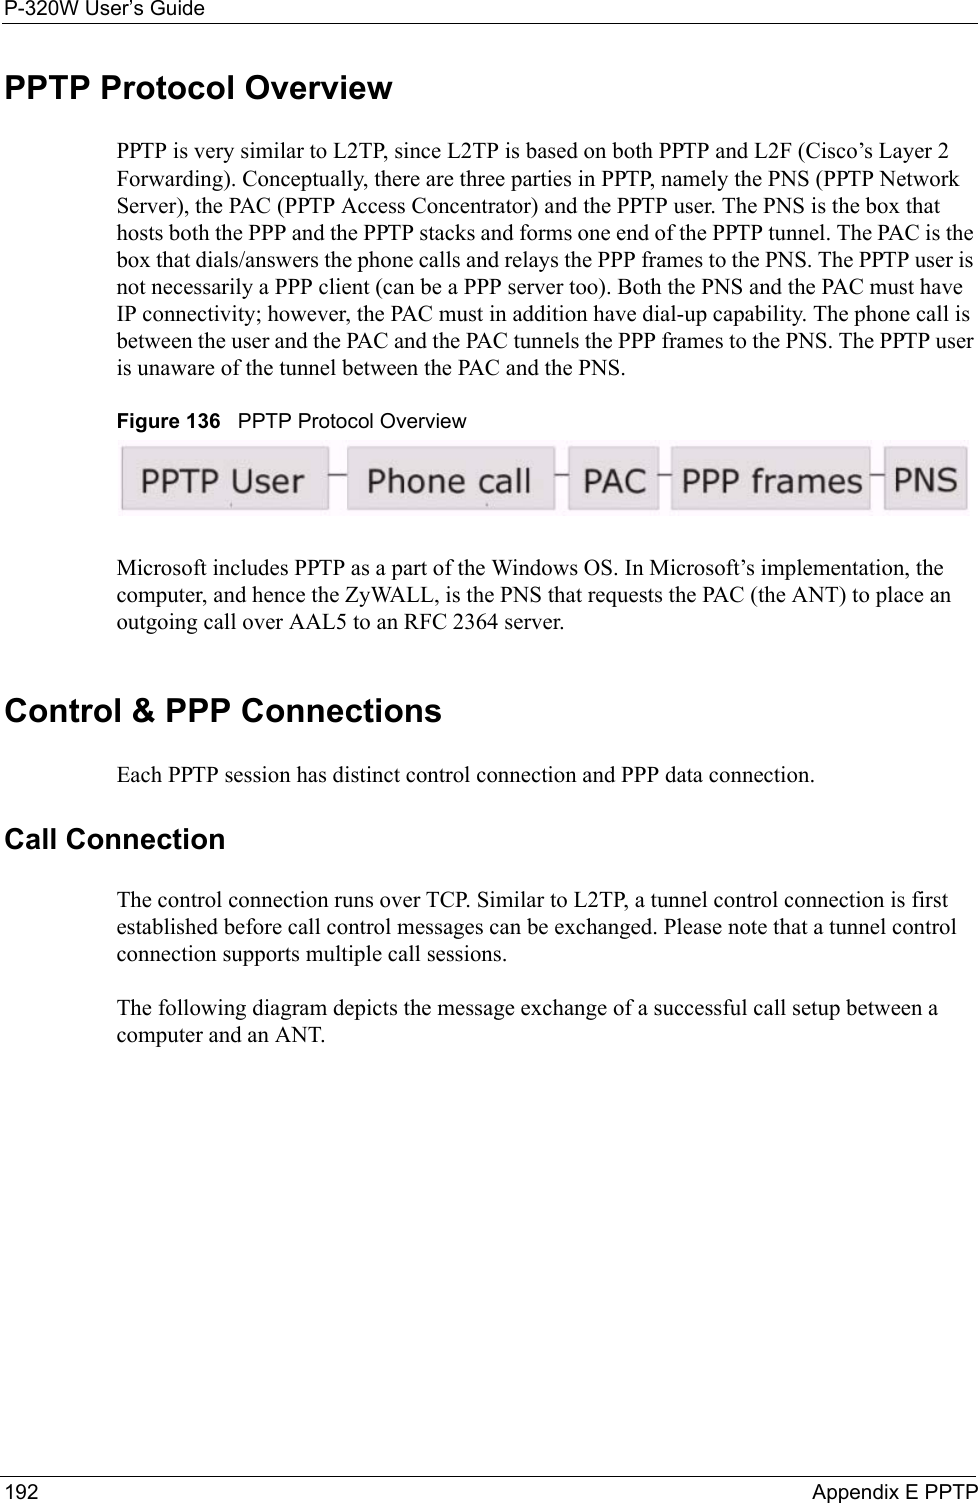 P-320W User’s Guide192  Appendix E PPTPPPTP Protocol OverviewPPTP is very similar to L2TP, since L2TP is based on both PPTP and L2F (Cisco’s Layer 2 Forwarding). Conceptually, there are three parties in PPTP, namely the PNS (PPTP Network Server), the PAC (PPTP Access Concentrator) and the PPTP user. The PNS is the box that hosts both the PPP and the PPTP stacks and forms one end of the PPTP tunnel. The PAC is the box that dials/answers the phone calls and relays the PPP frames to the PNS. The PPTP user is not necessarily a PPP client (can be a PPP server too). Both the PNS and the PAC must have IP connectivity; however, the PAC must in addition have dial-up capability. The phone call is between the user and the PAC and the PAC tunnels the PPP frames to the PNS. The PPTP user is unaware of the tunnel between the PAC and the PNS.Figure 136   PPTP Protocol OverviewMicrosoft includes PPTP as a part of the Windows OS. In Microsoft’s implementation, the computer, and hence the ZyWALL, is the PNS that requests the PAC (the ANT) to place an outgoing call over AAL5 to an RFC 2364 server. Control &amp; PPP ConnectionsEach PPTP session has distinct control connection and PPP data connection.Call ConnectionThe control connection runs over TCP. Similar to L2TP, a tunnel control connection is first established before call control messages can be exchanged. Please note that a tunnel control connection supports multiple call sessions.The following diagram depicts the message exchange of a successful call setup between a computer and an ANT.